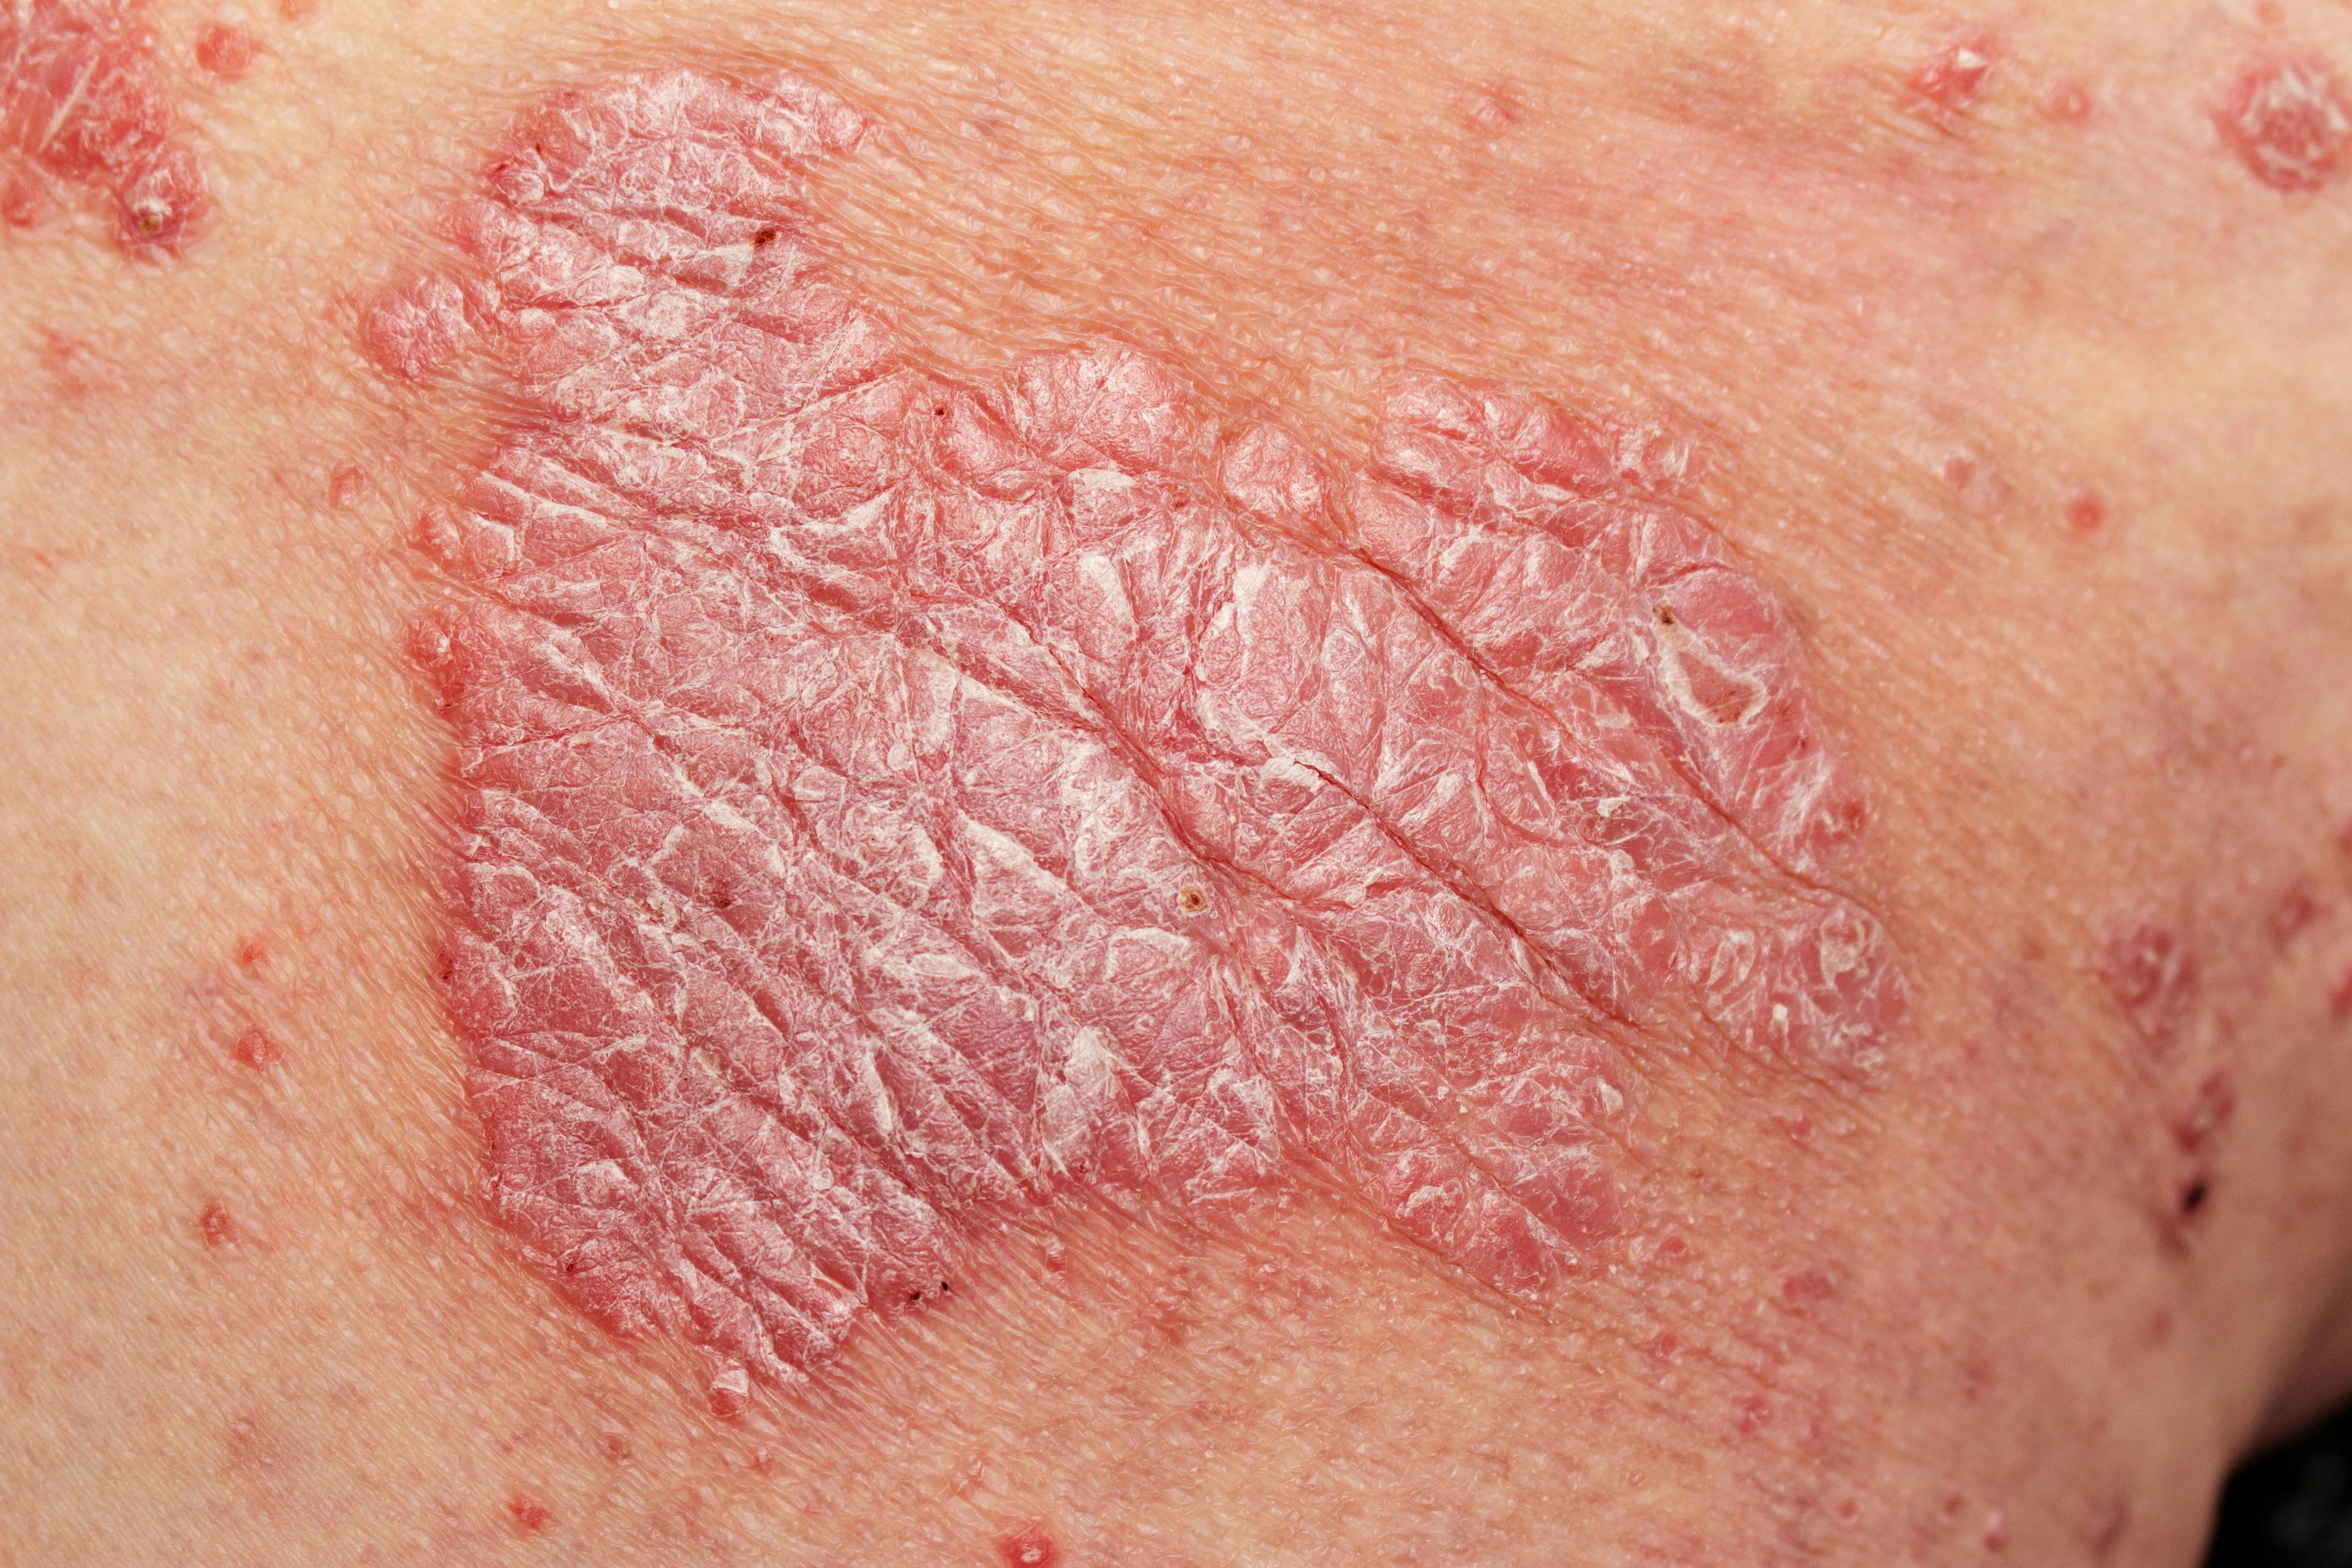 Tildrakizumab Data Reveals Significant Wellbeing Improvement in Patients With Plaque Psoriasis